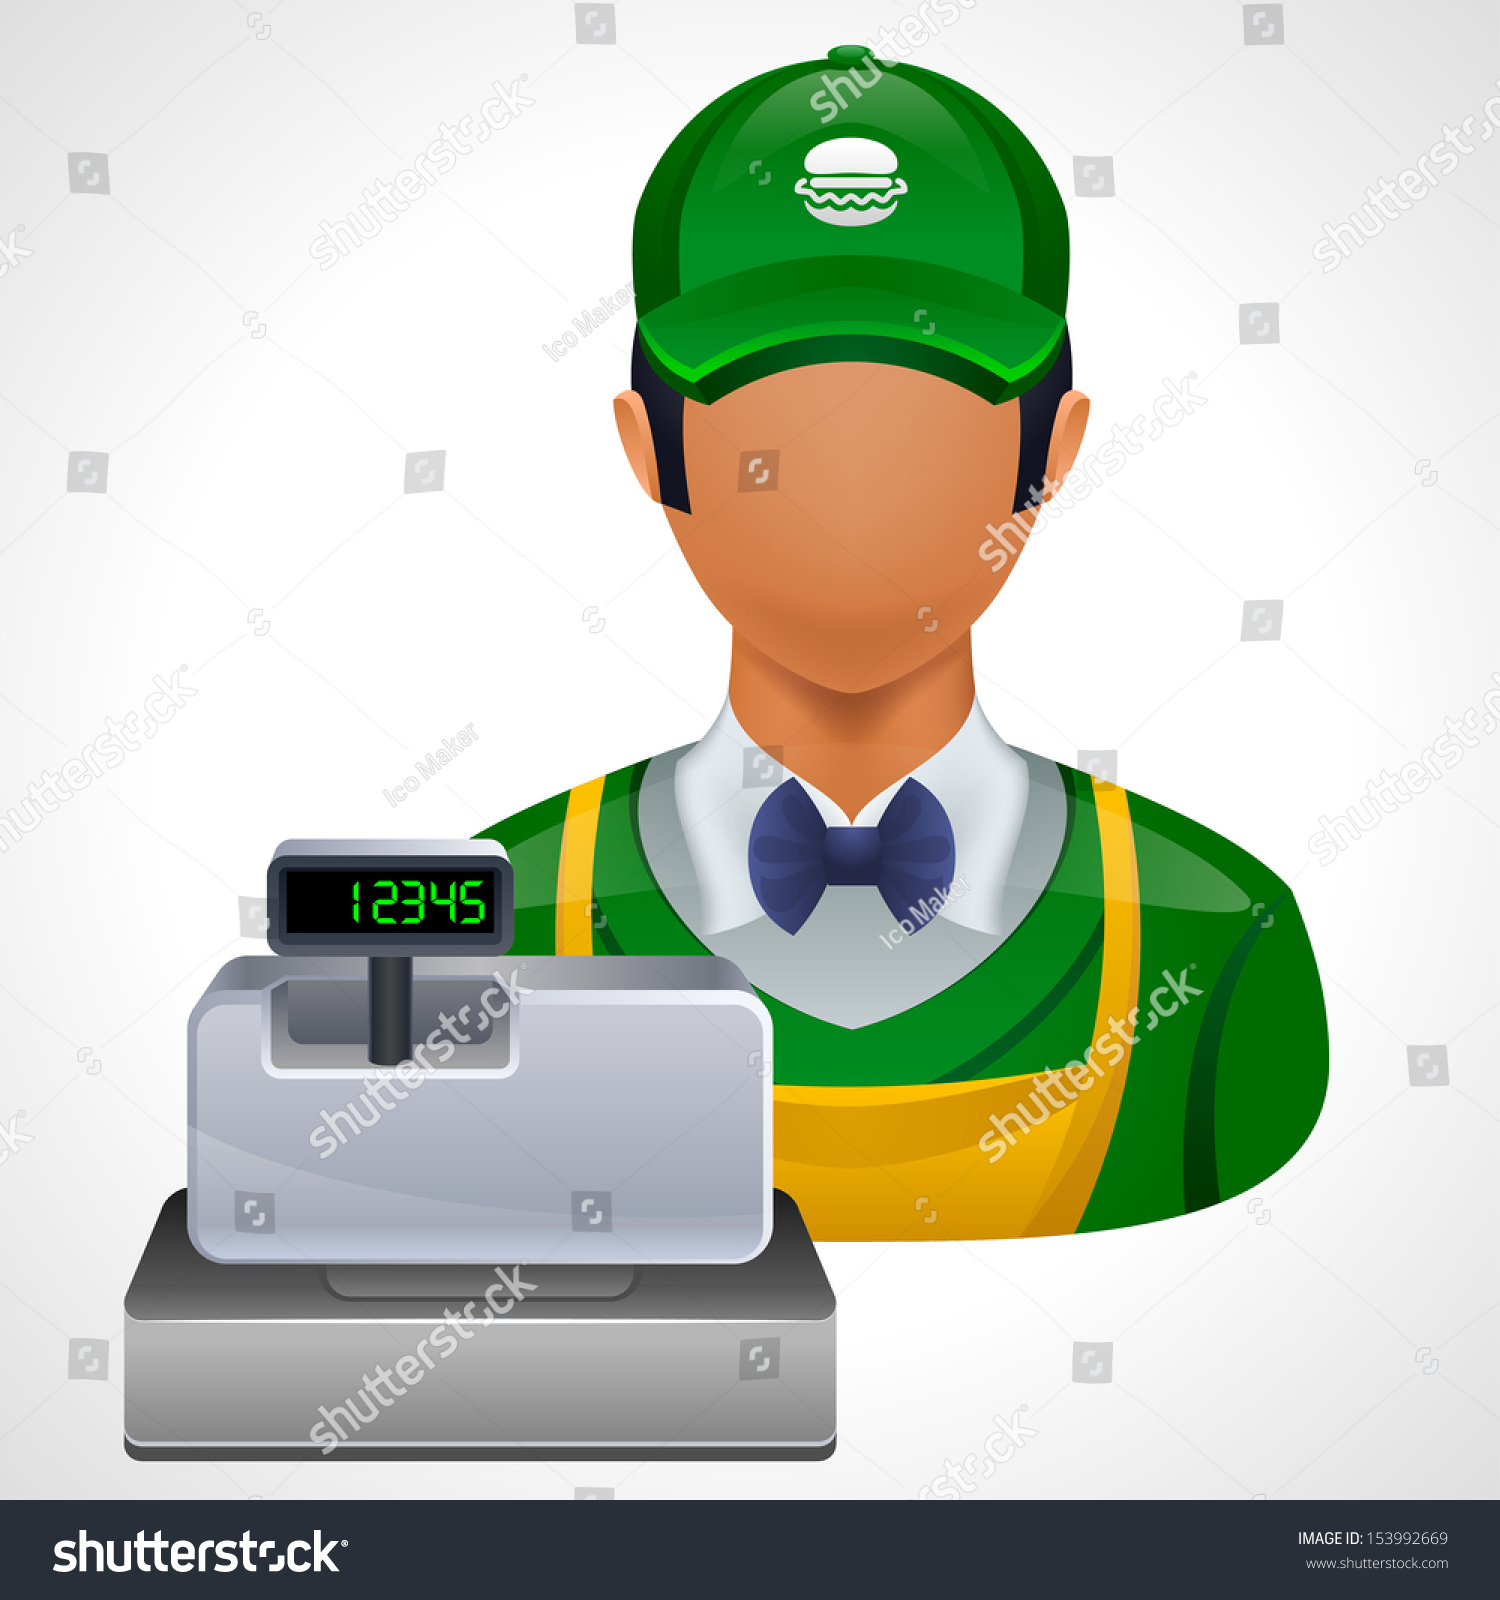 fast food worker clipart - photo #22